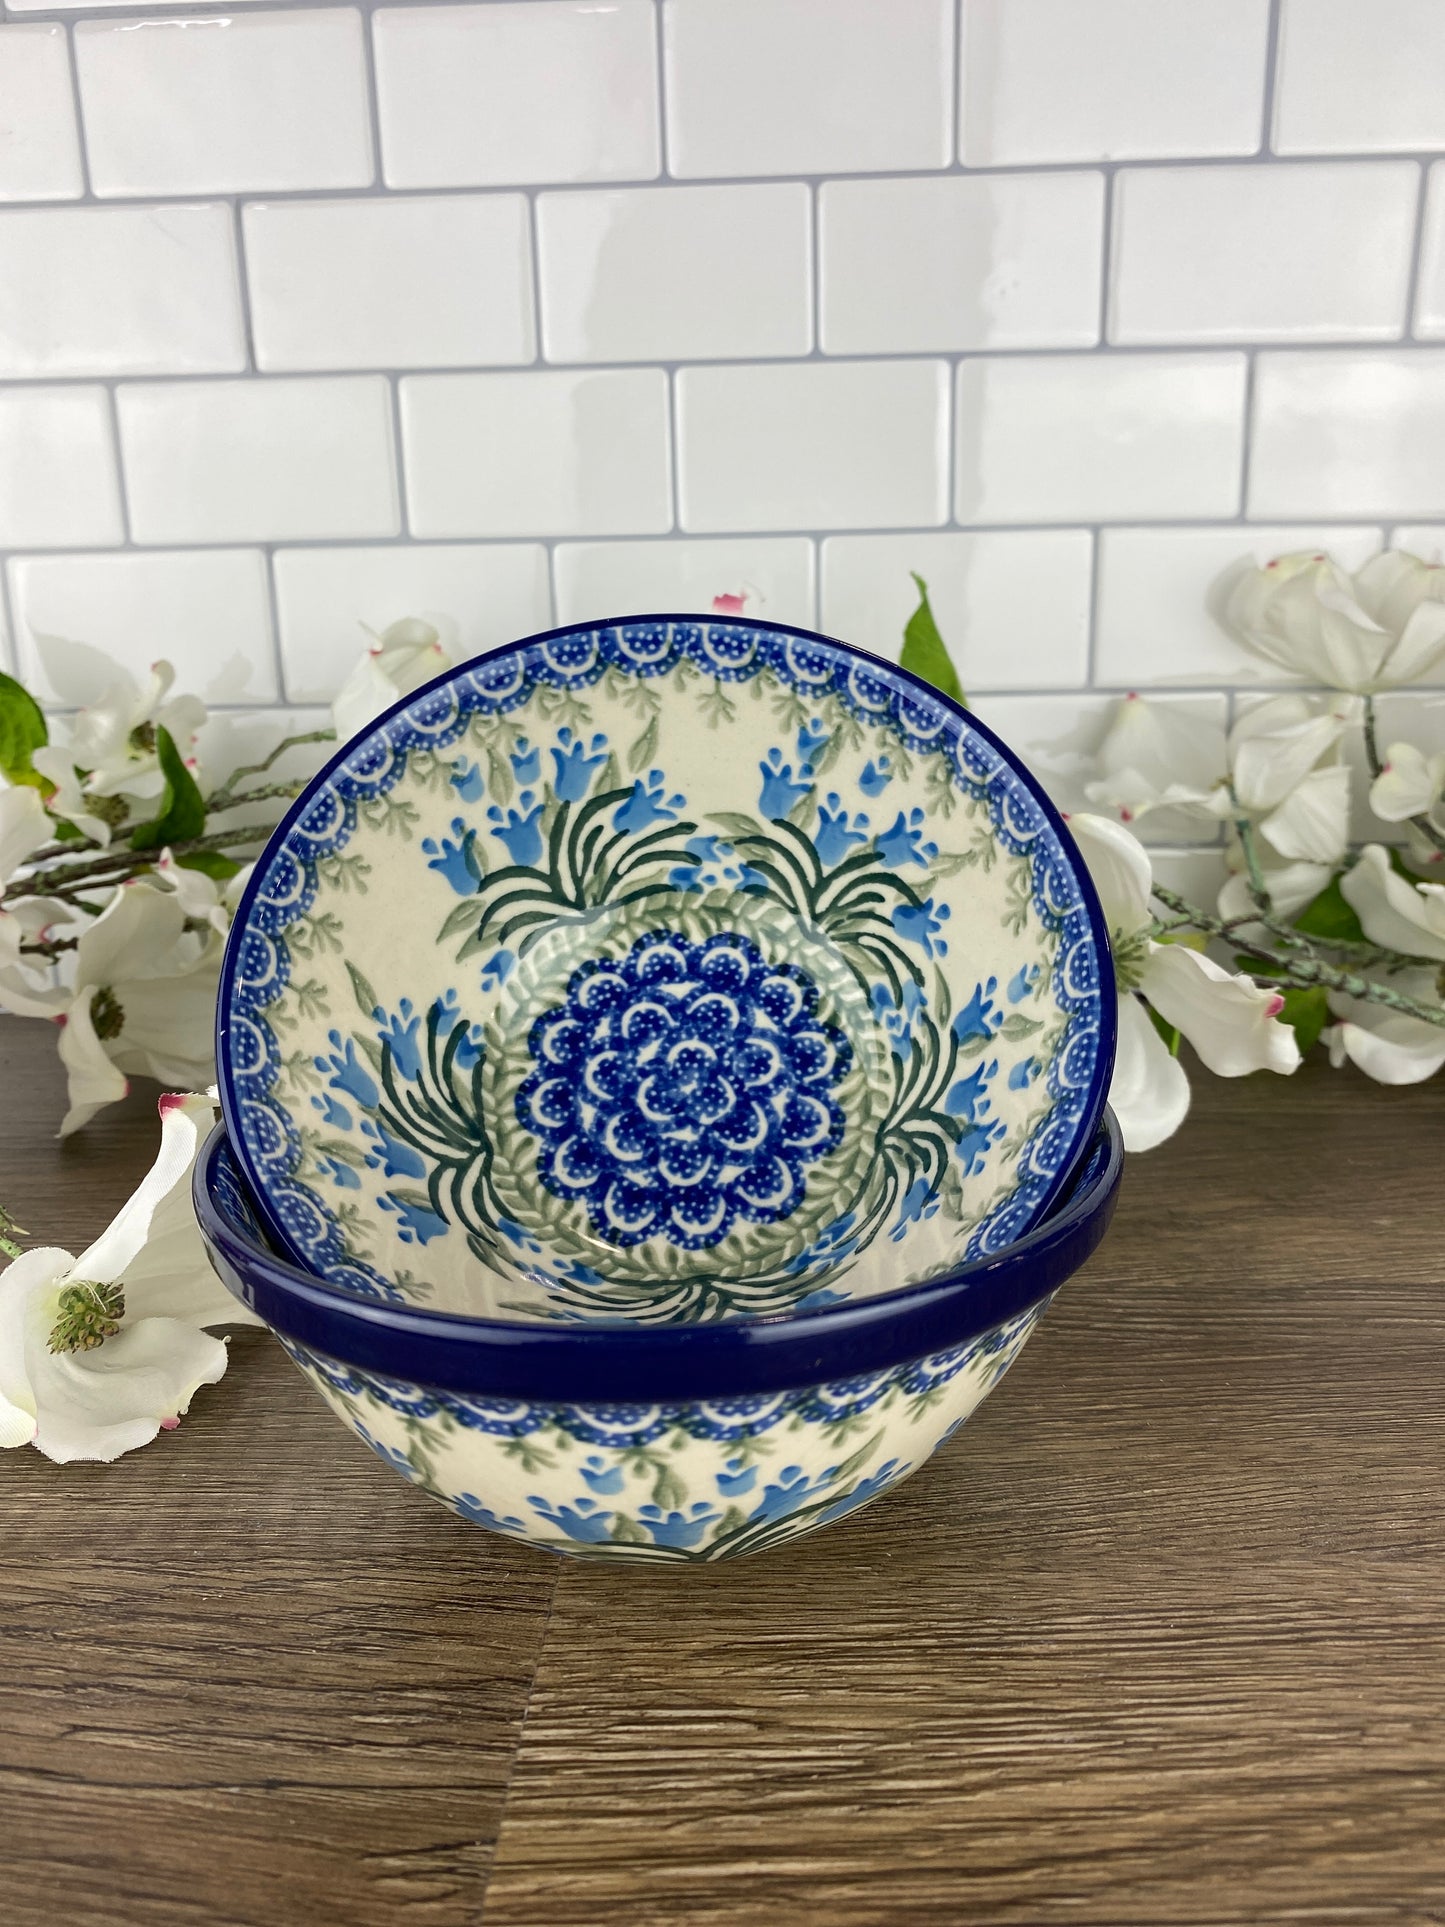 Small Cereal Bowl - Shape 59 - Pattern 1432